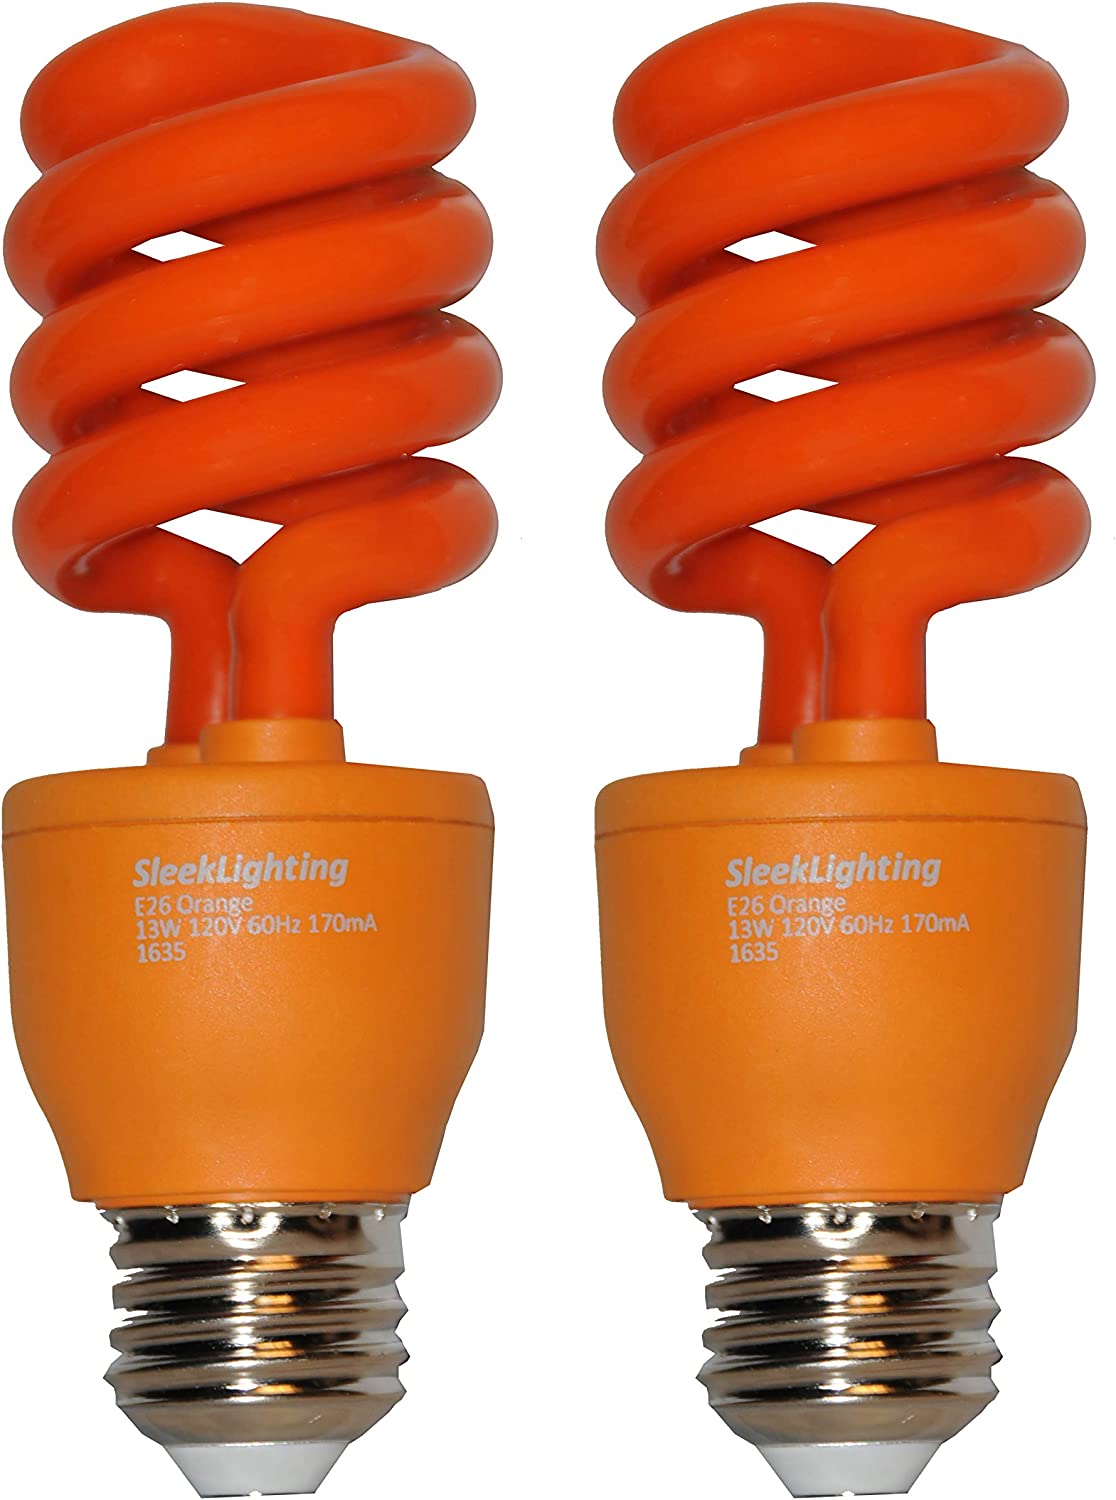 SleekLighting 13 Watt Red Bug Light Bulbs for Outdoor – General Purpose Spiral CFL Red Light Bulbs- UL Approved- Uses 13 Watts of Energy, 120 Volts, E26 Medium Base. (Pack of 2)